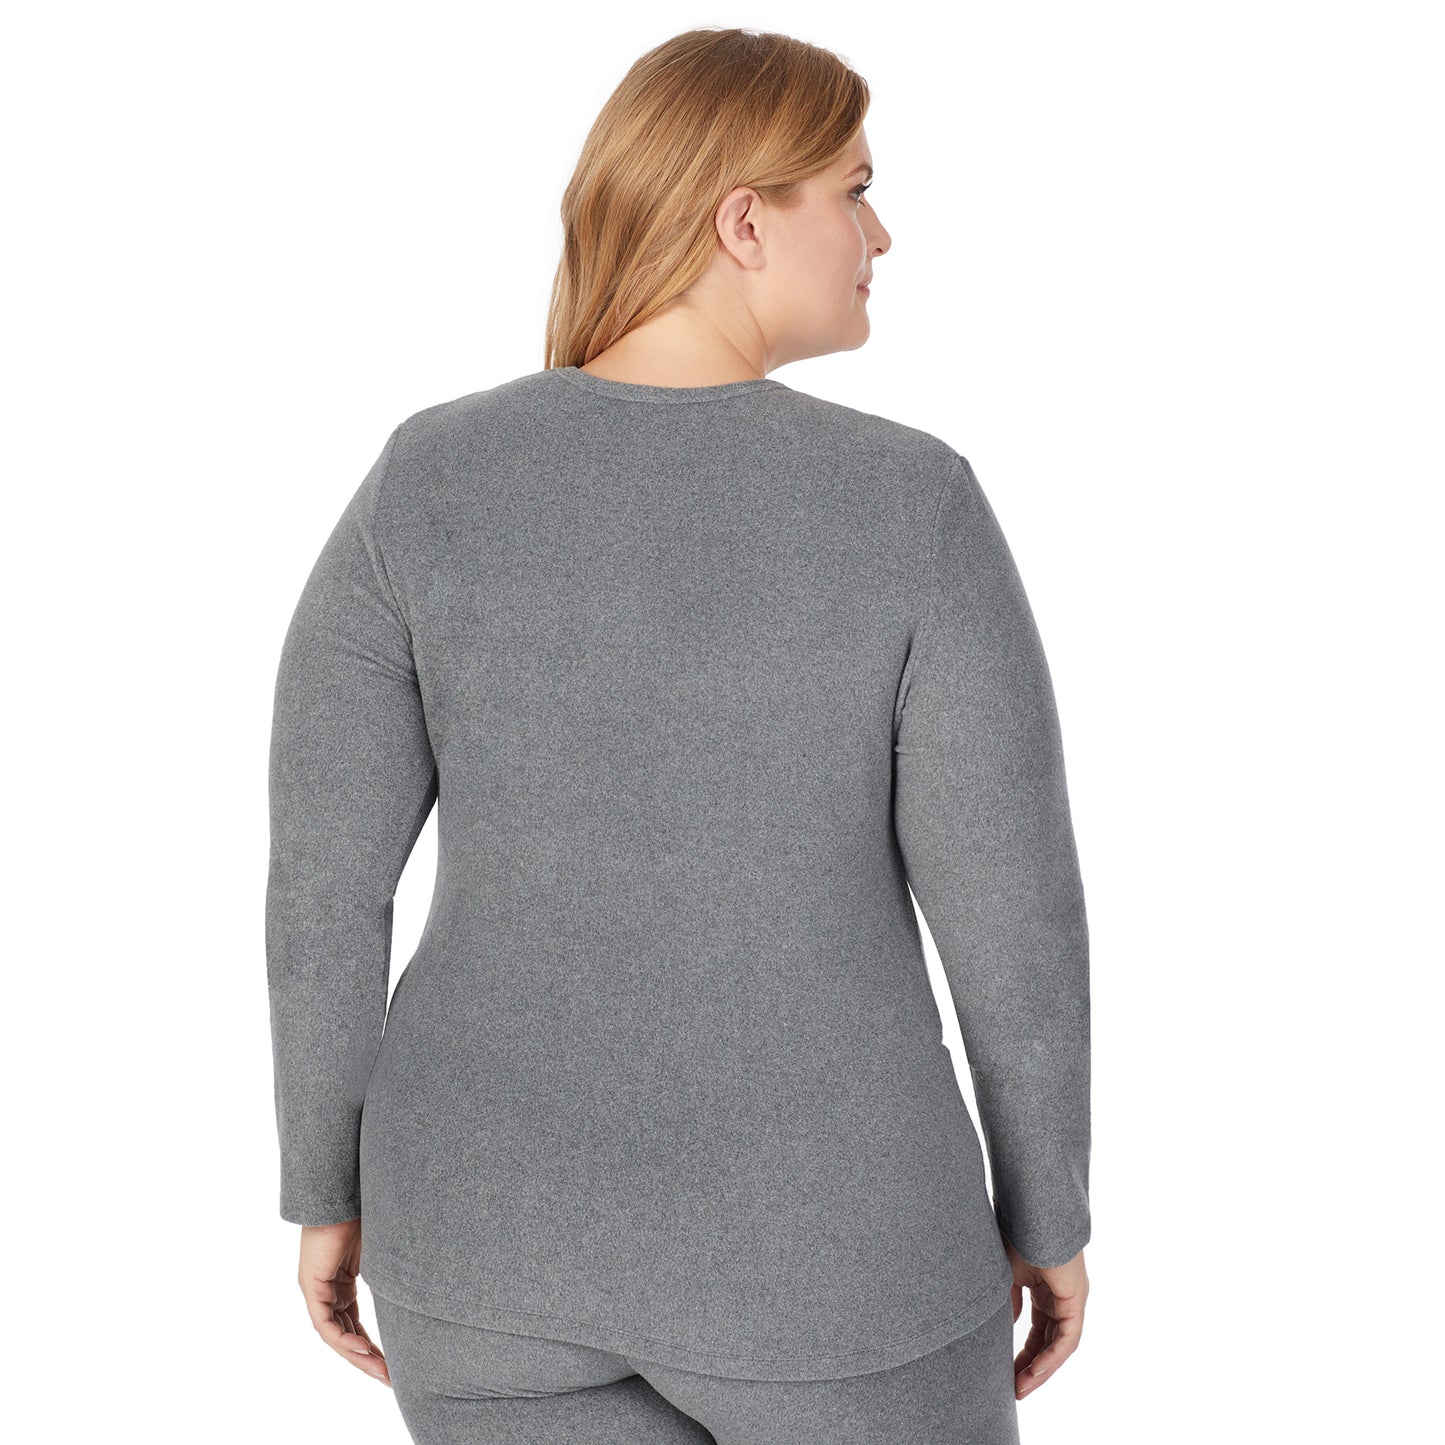 Charcoal Heather; Model is wearing size 1X. She is 5'9", Bust 38", Waist 36", Hips 48.5".@Upper body of a lady wearing grey long sleeve crew